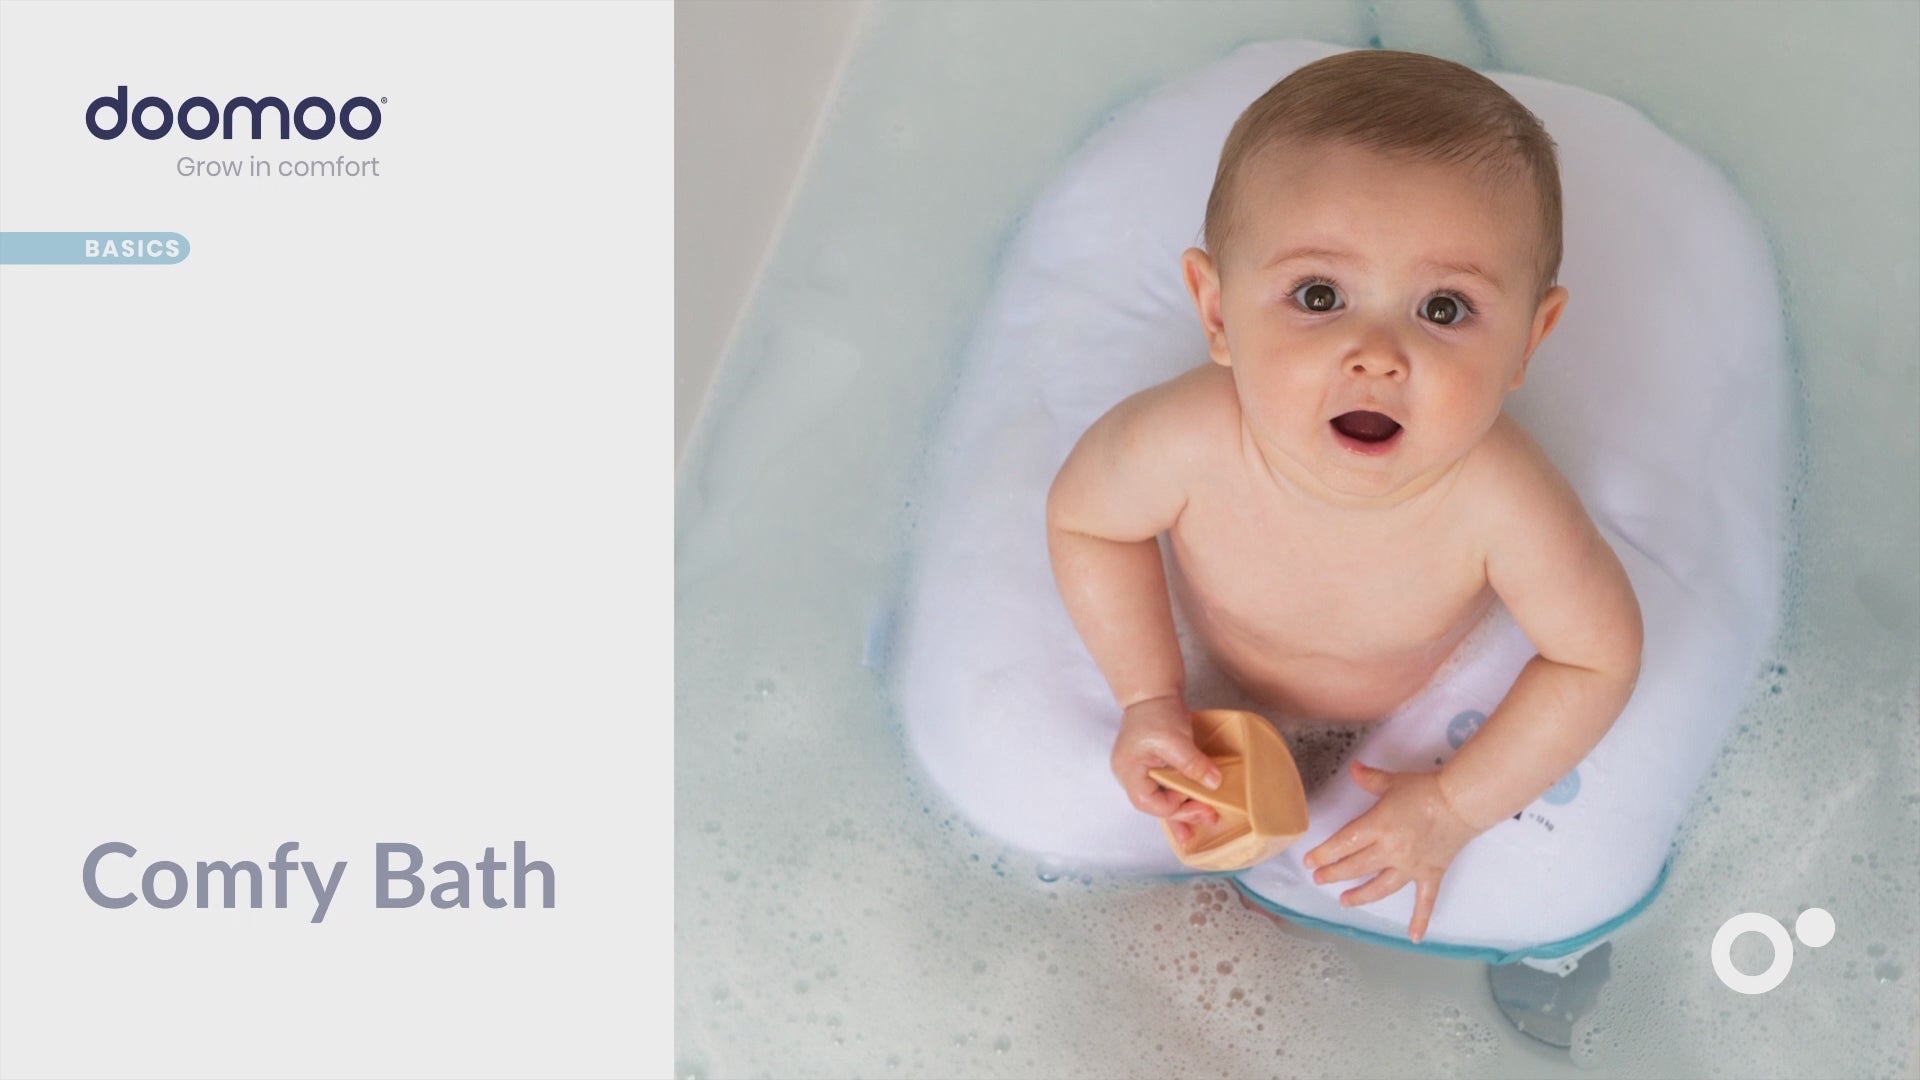 Bath cushion to bath you baby handsfree. He can safly ly or sit in the water. Safe for baby and no back strains for the parents